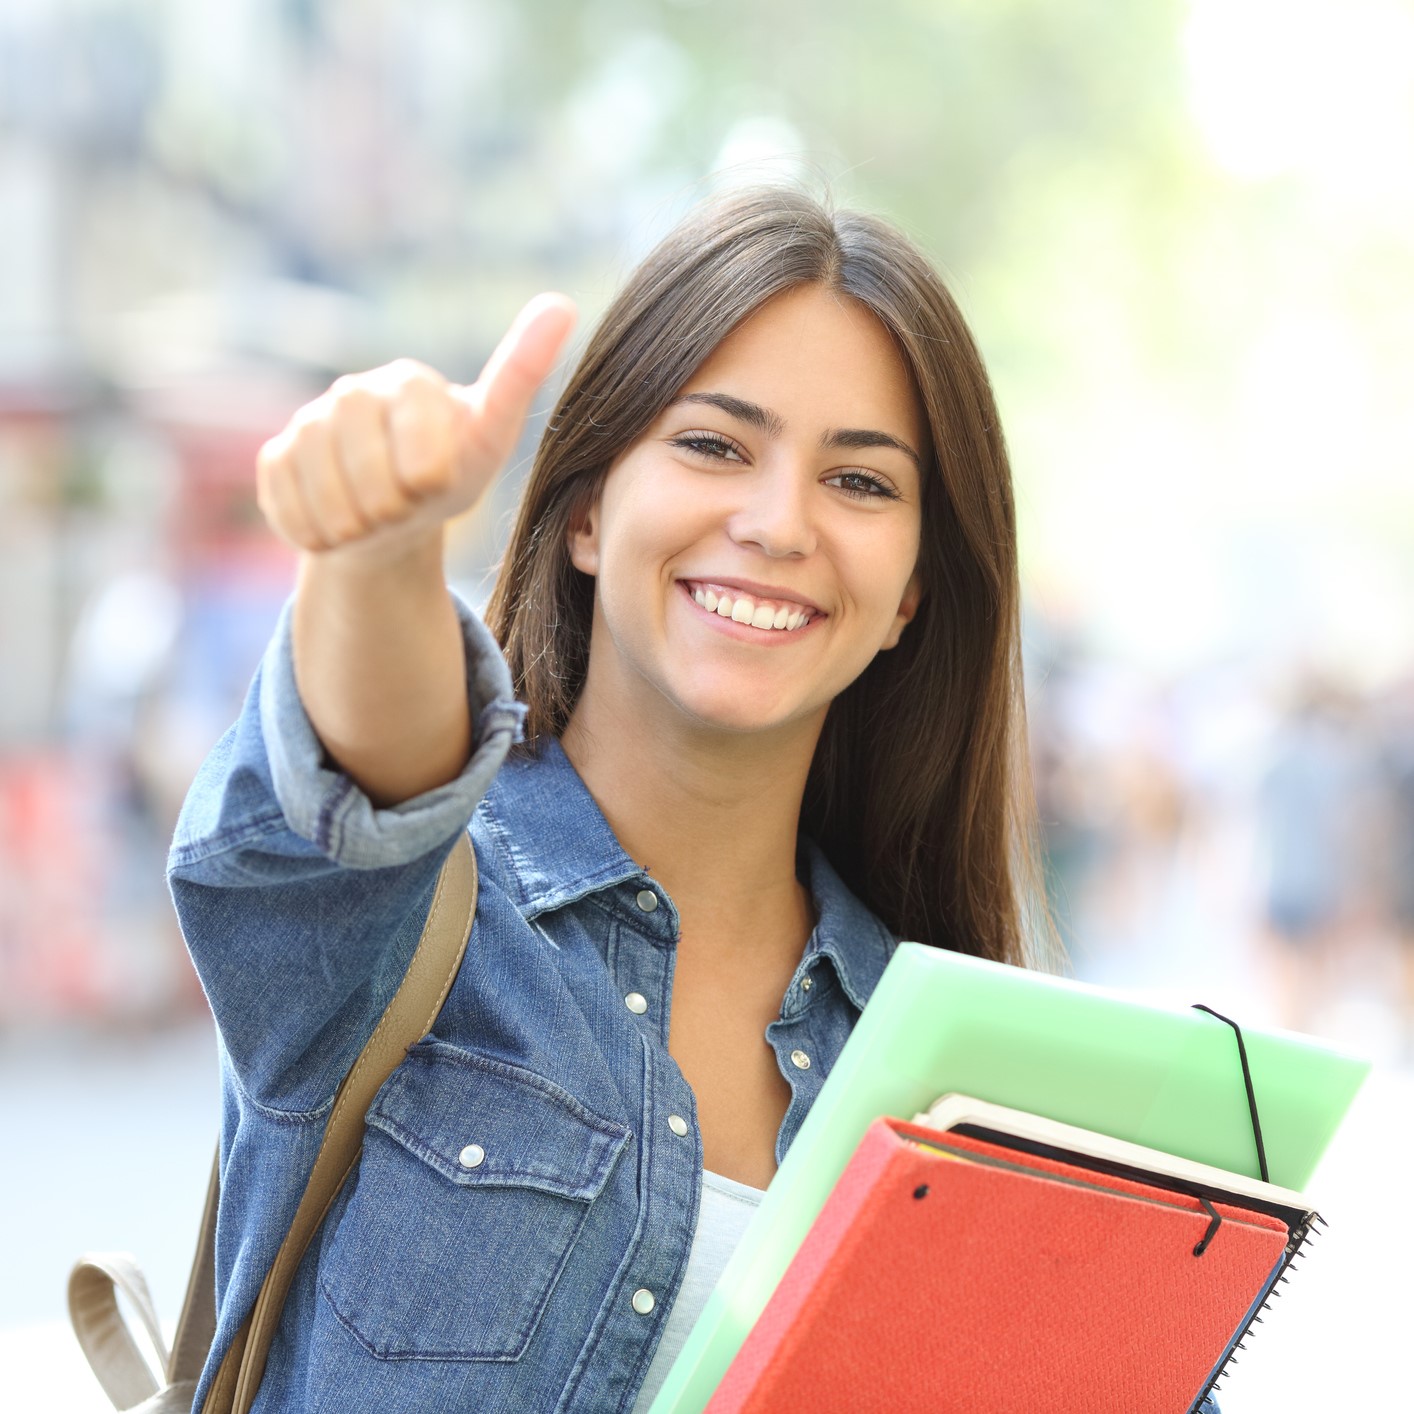 Happy student posing with thumbs up looking at you in the street